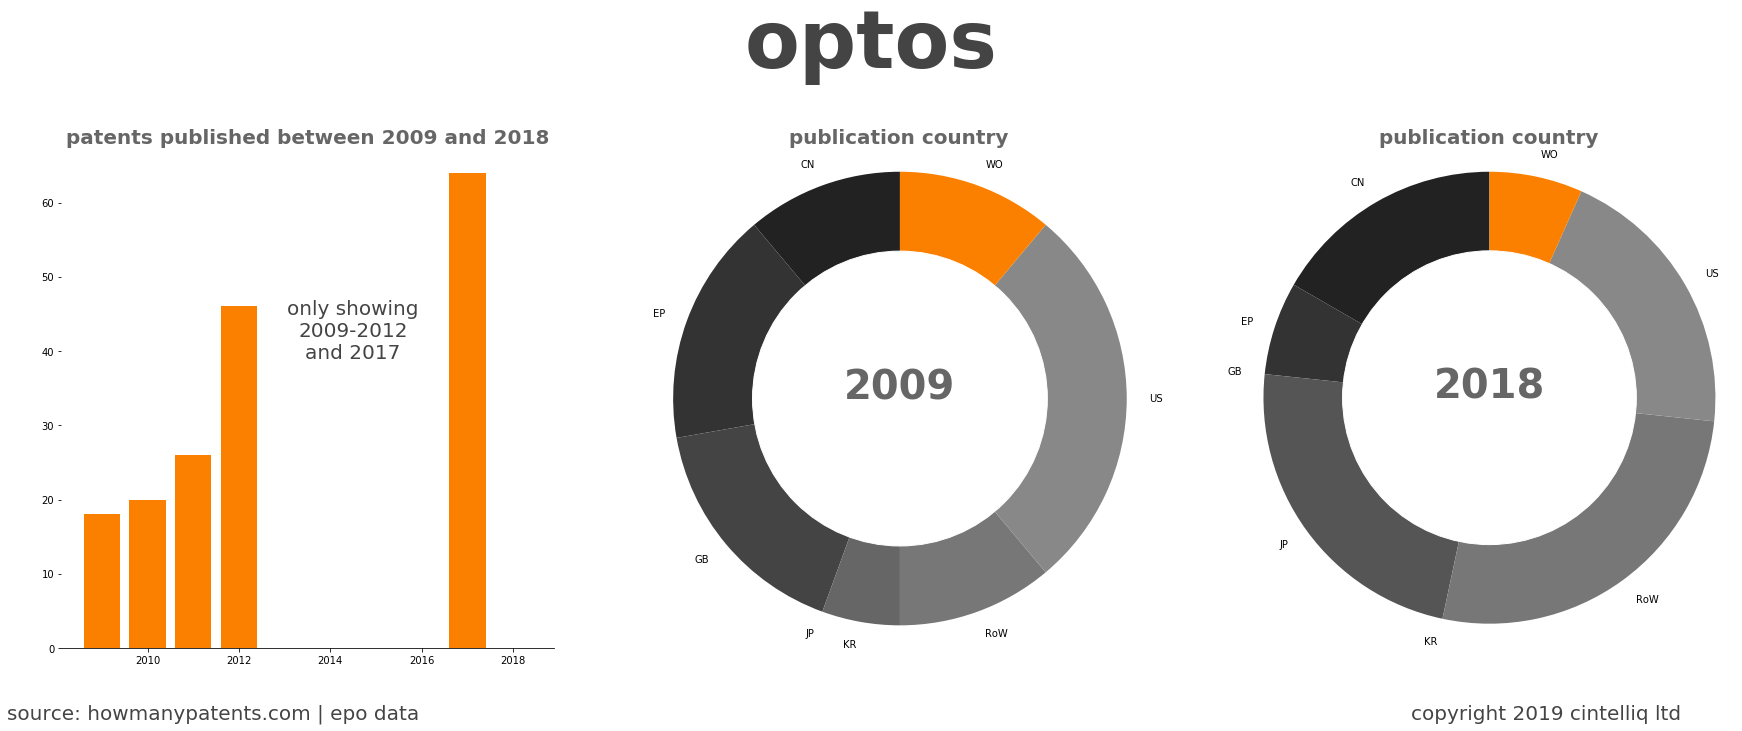 summary of patents for Optos